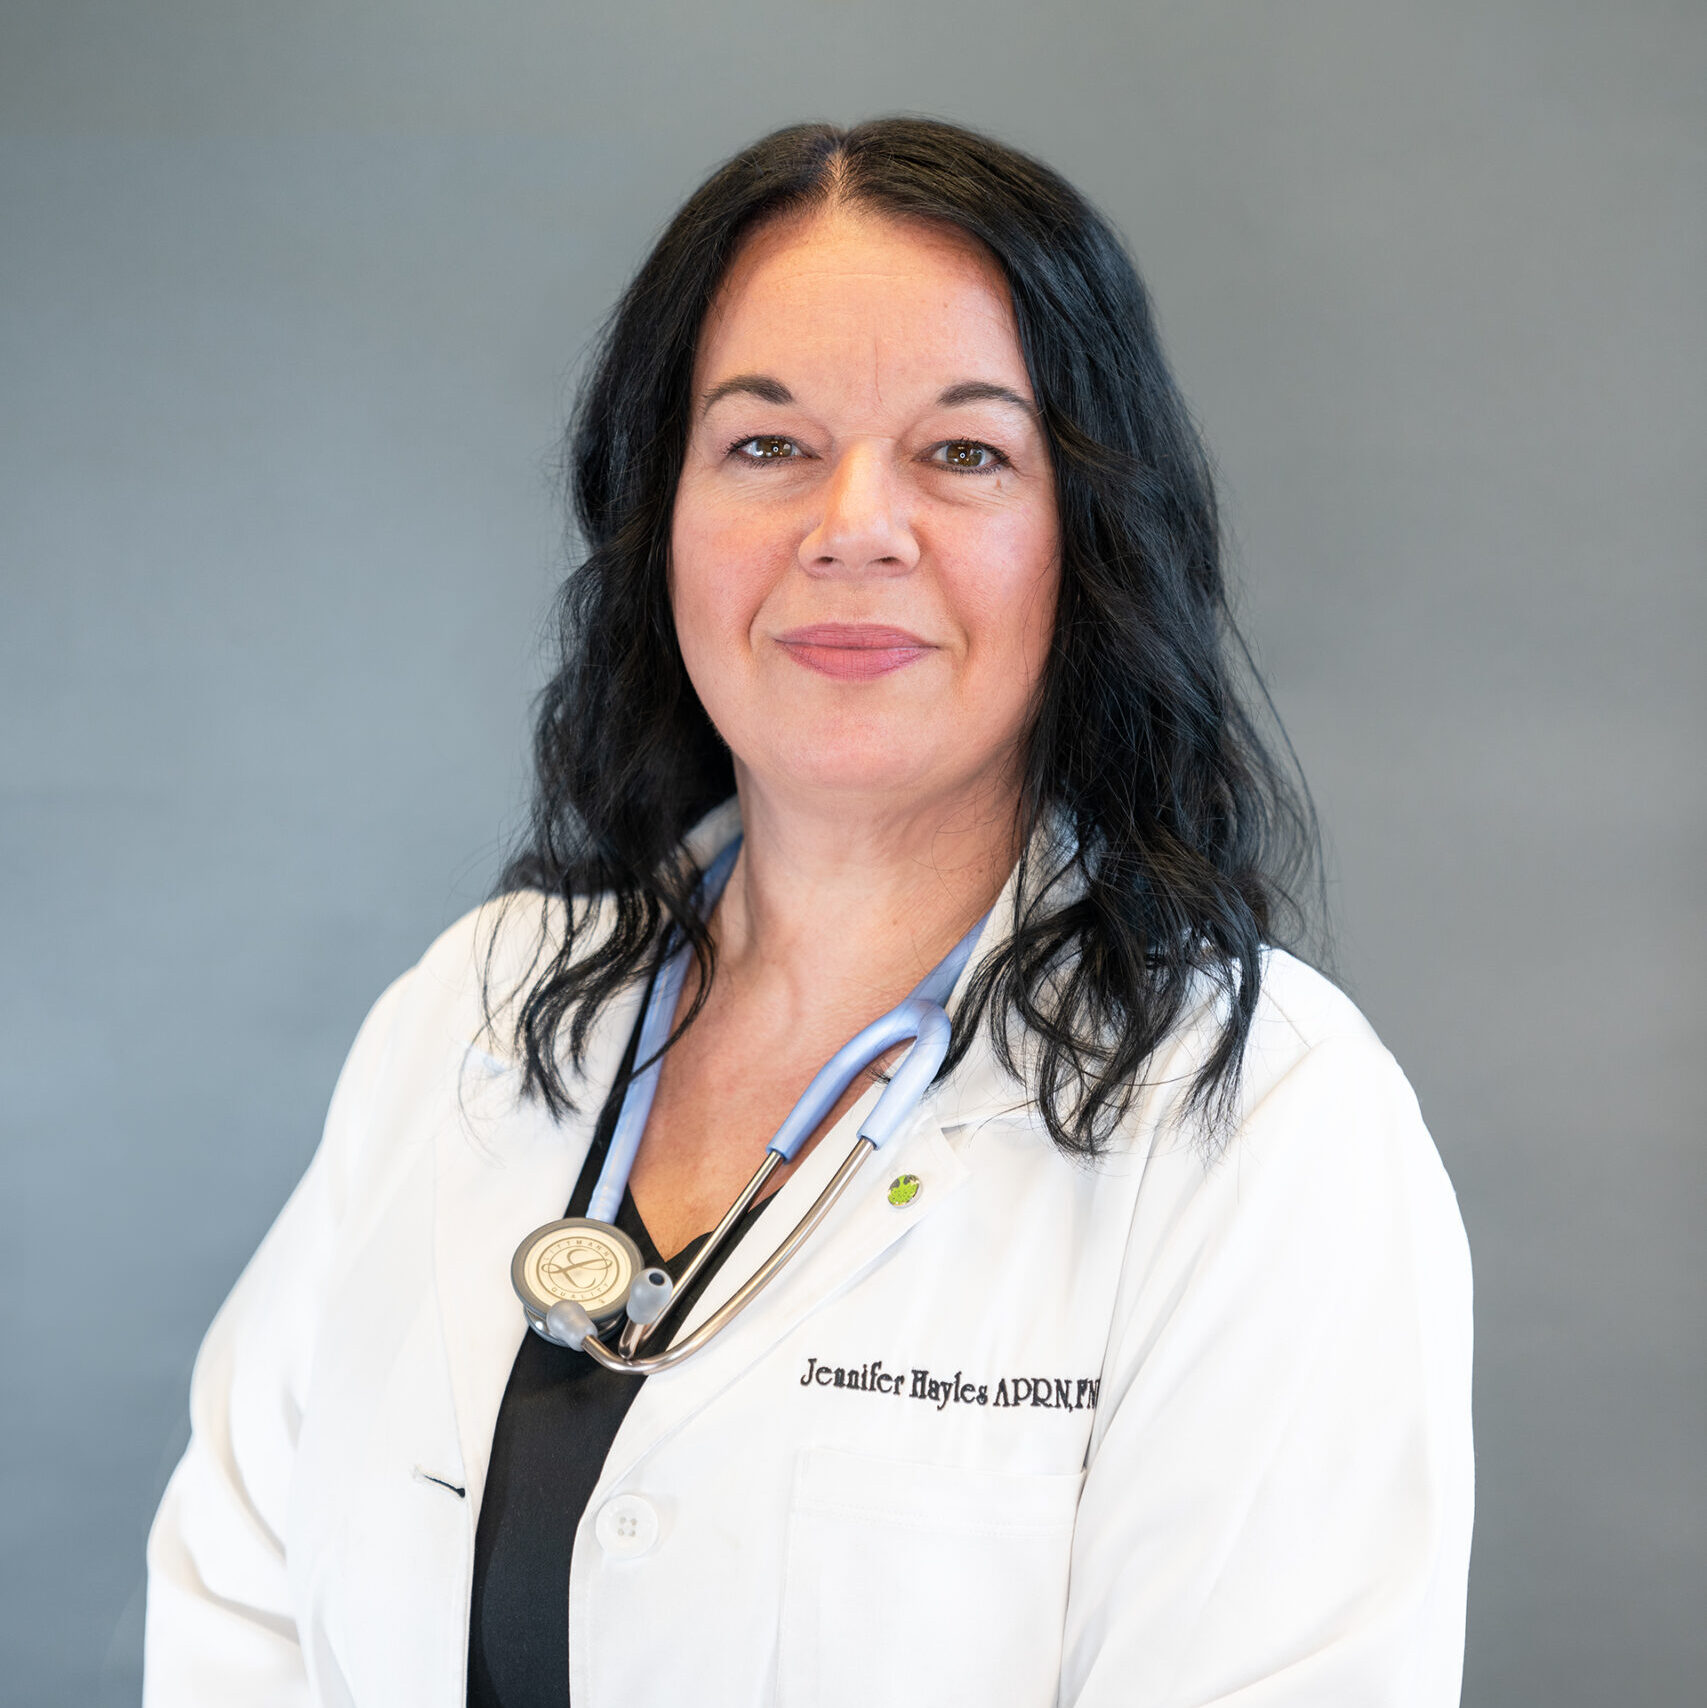 Jennifer Hayles, FNP-C is a graduate of LMU Caylor School of Nursing and King University. She completed her Masters of Science in Nursing (MSN) from Chamberlain University in Chicago, Illinois in 2019.